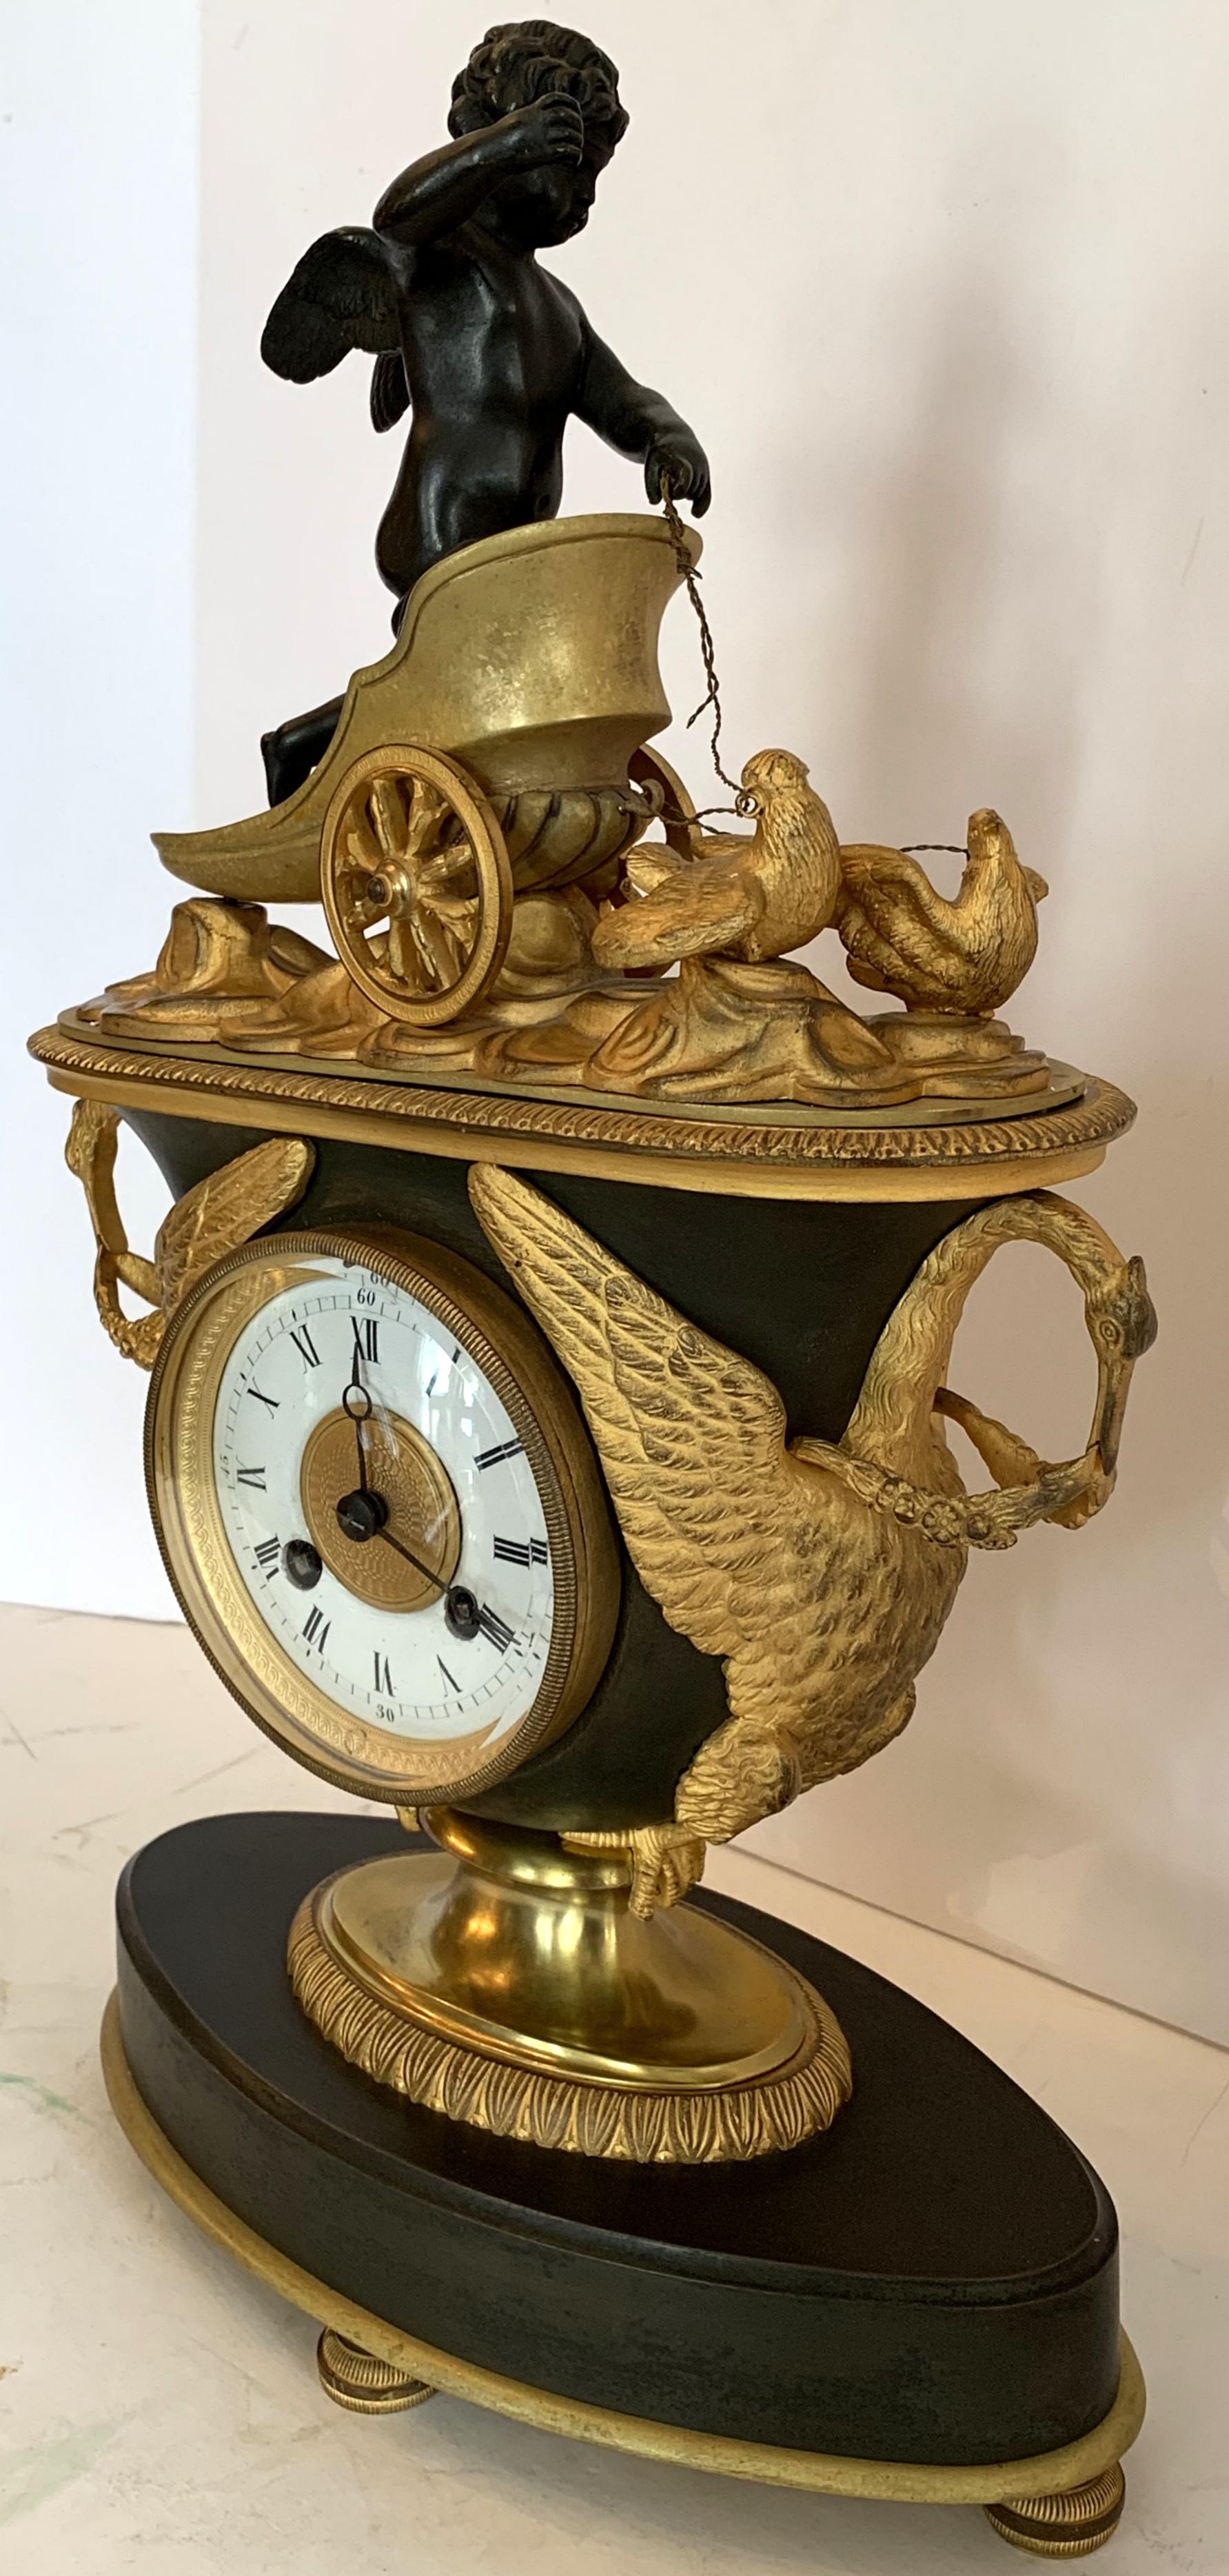 A wonderful French Empire gilt and patinated bronze clock adorned with a cherub riding in a chariot pulled by chickens over a swan handle urn sitting on an oval base, clock is currently working but not guaranteed.